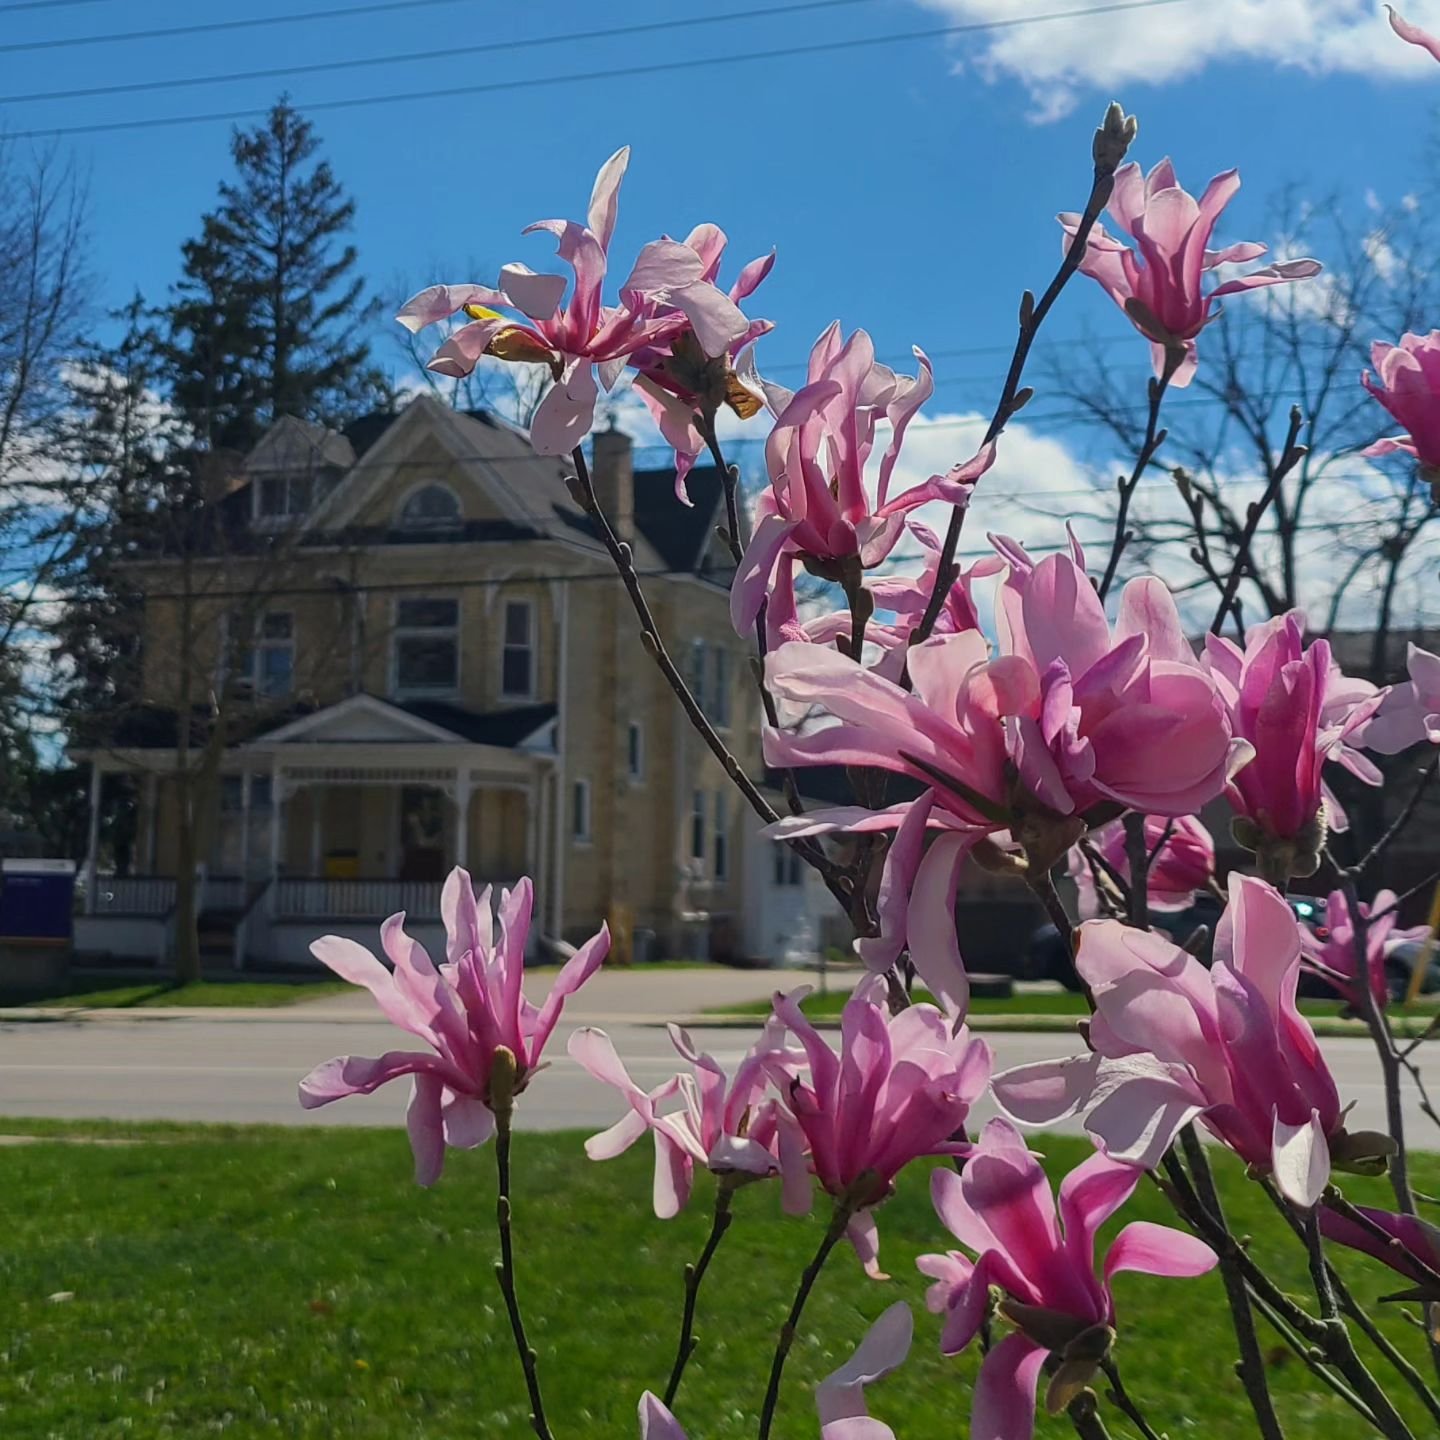 Obligatory annual Spring photo of the best view of our Waterloo Office! Get some sun if you can ☀️
Sending all students care as you navigate finals and big transitions.

#blooming